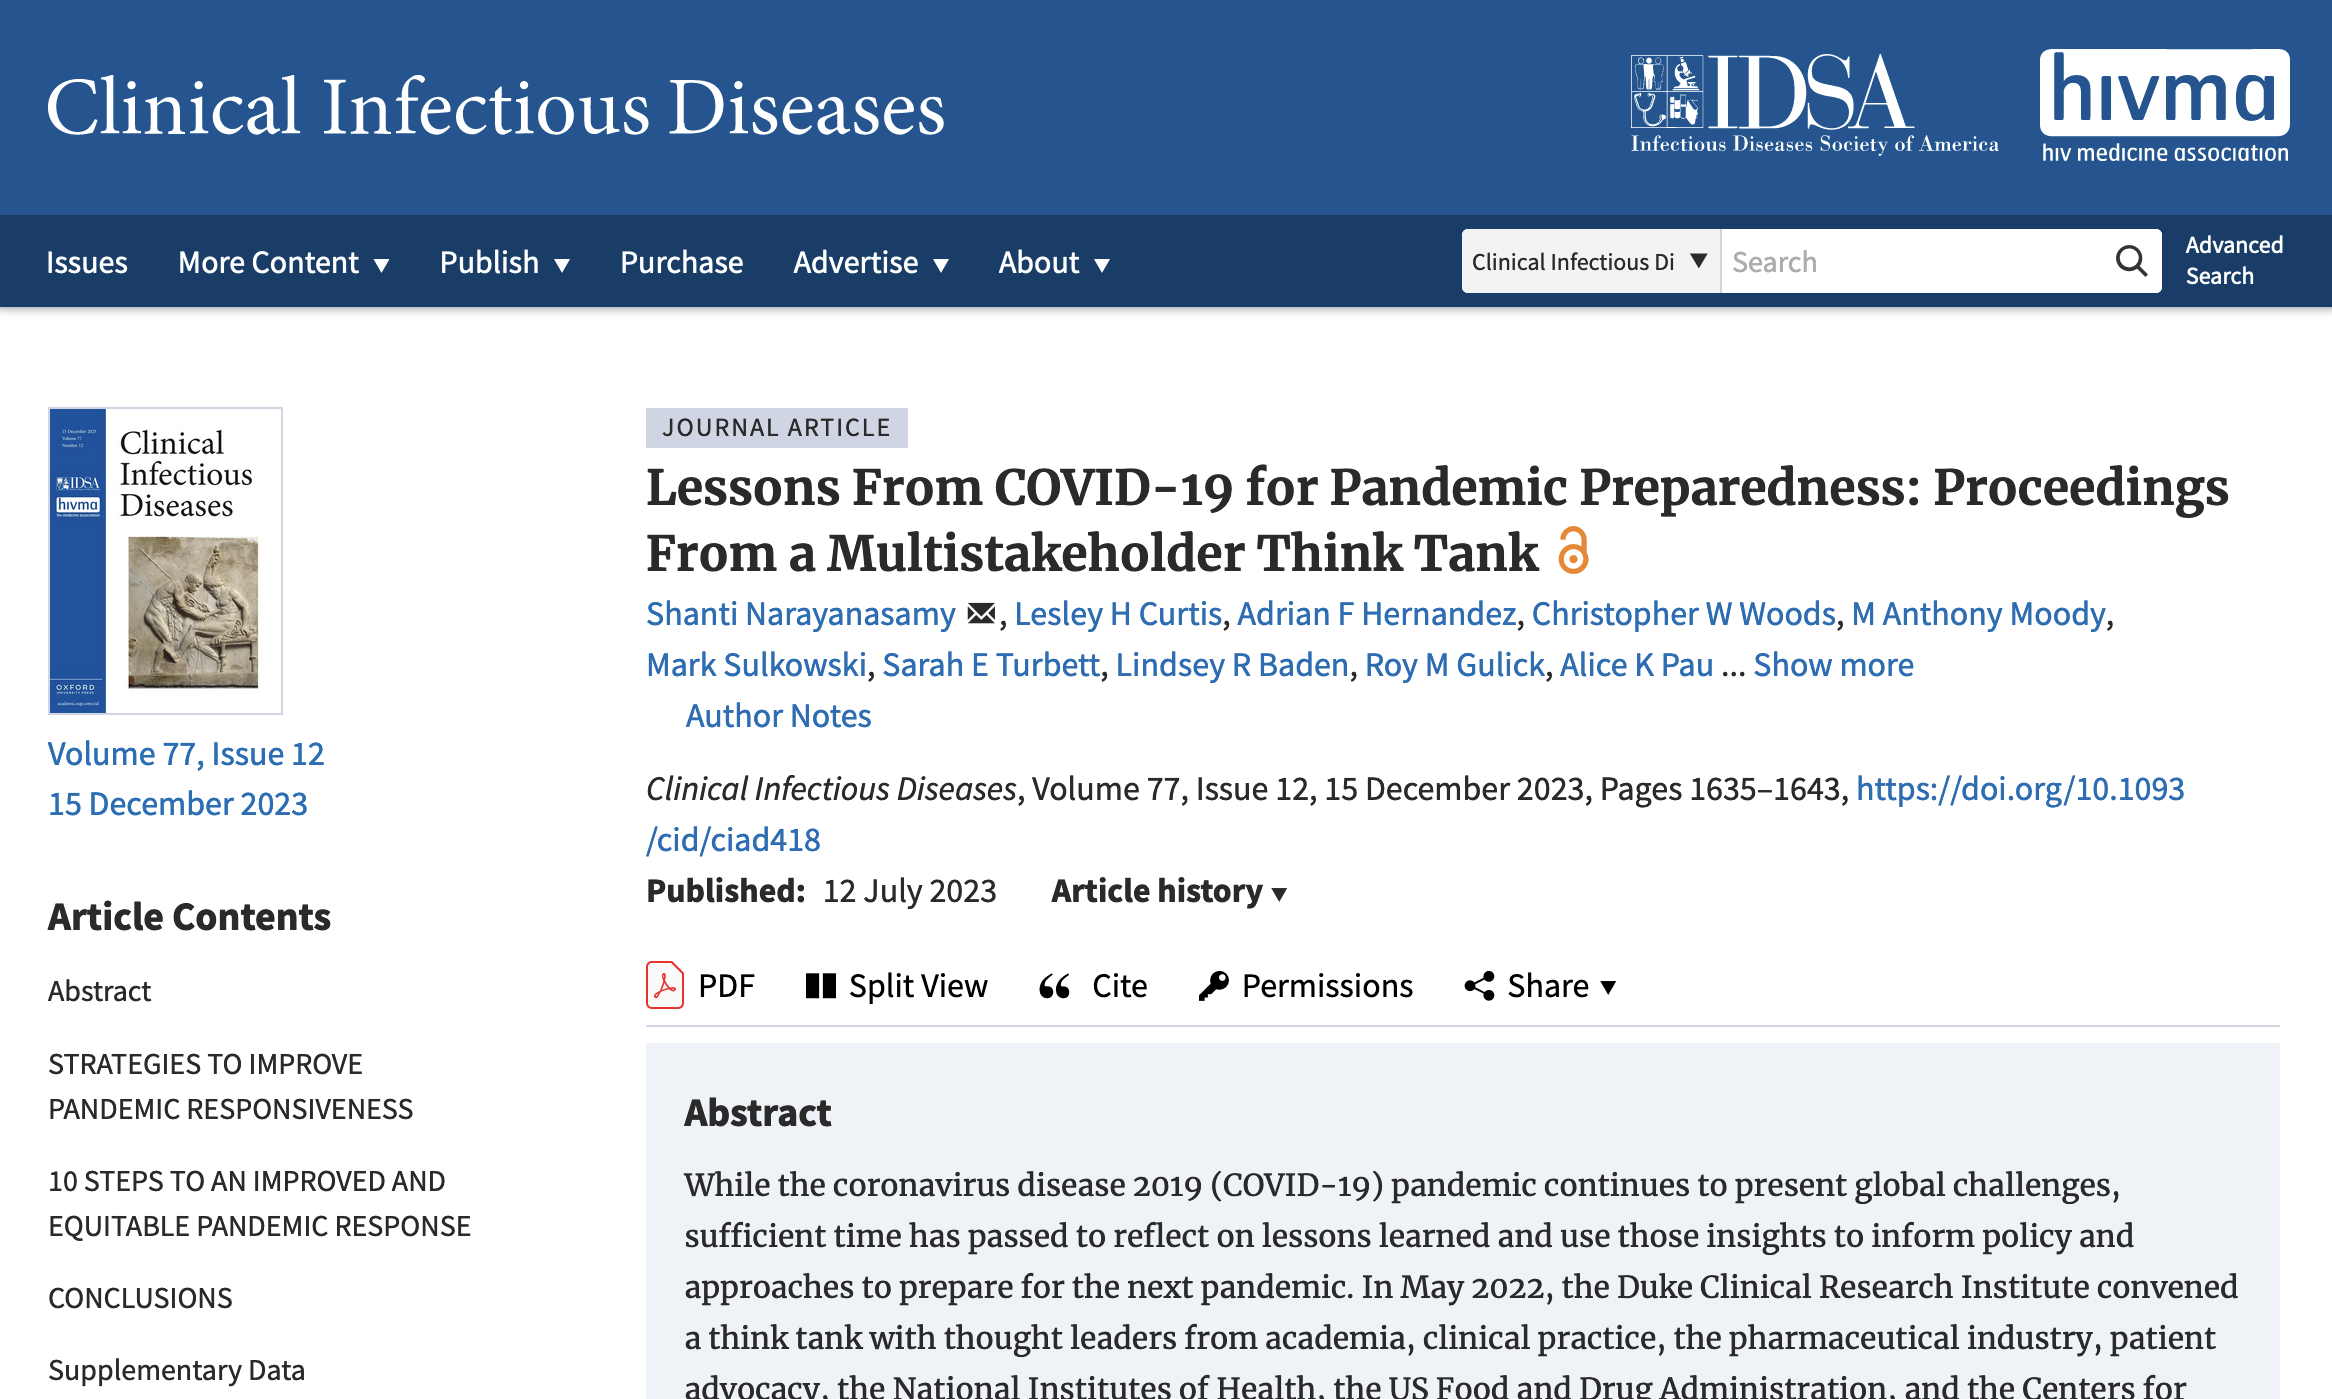 A screenshot showing a publication in Clinical Infectious Diseases